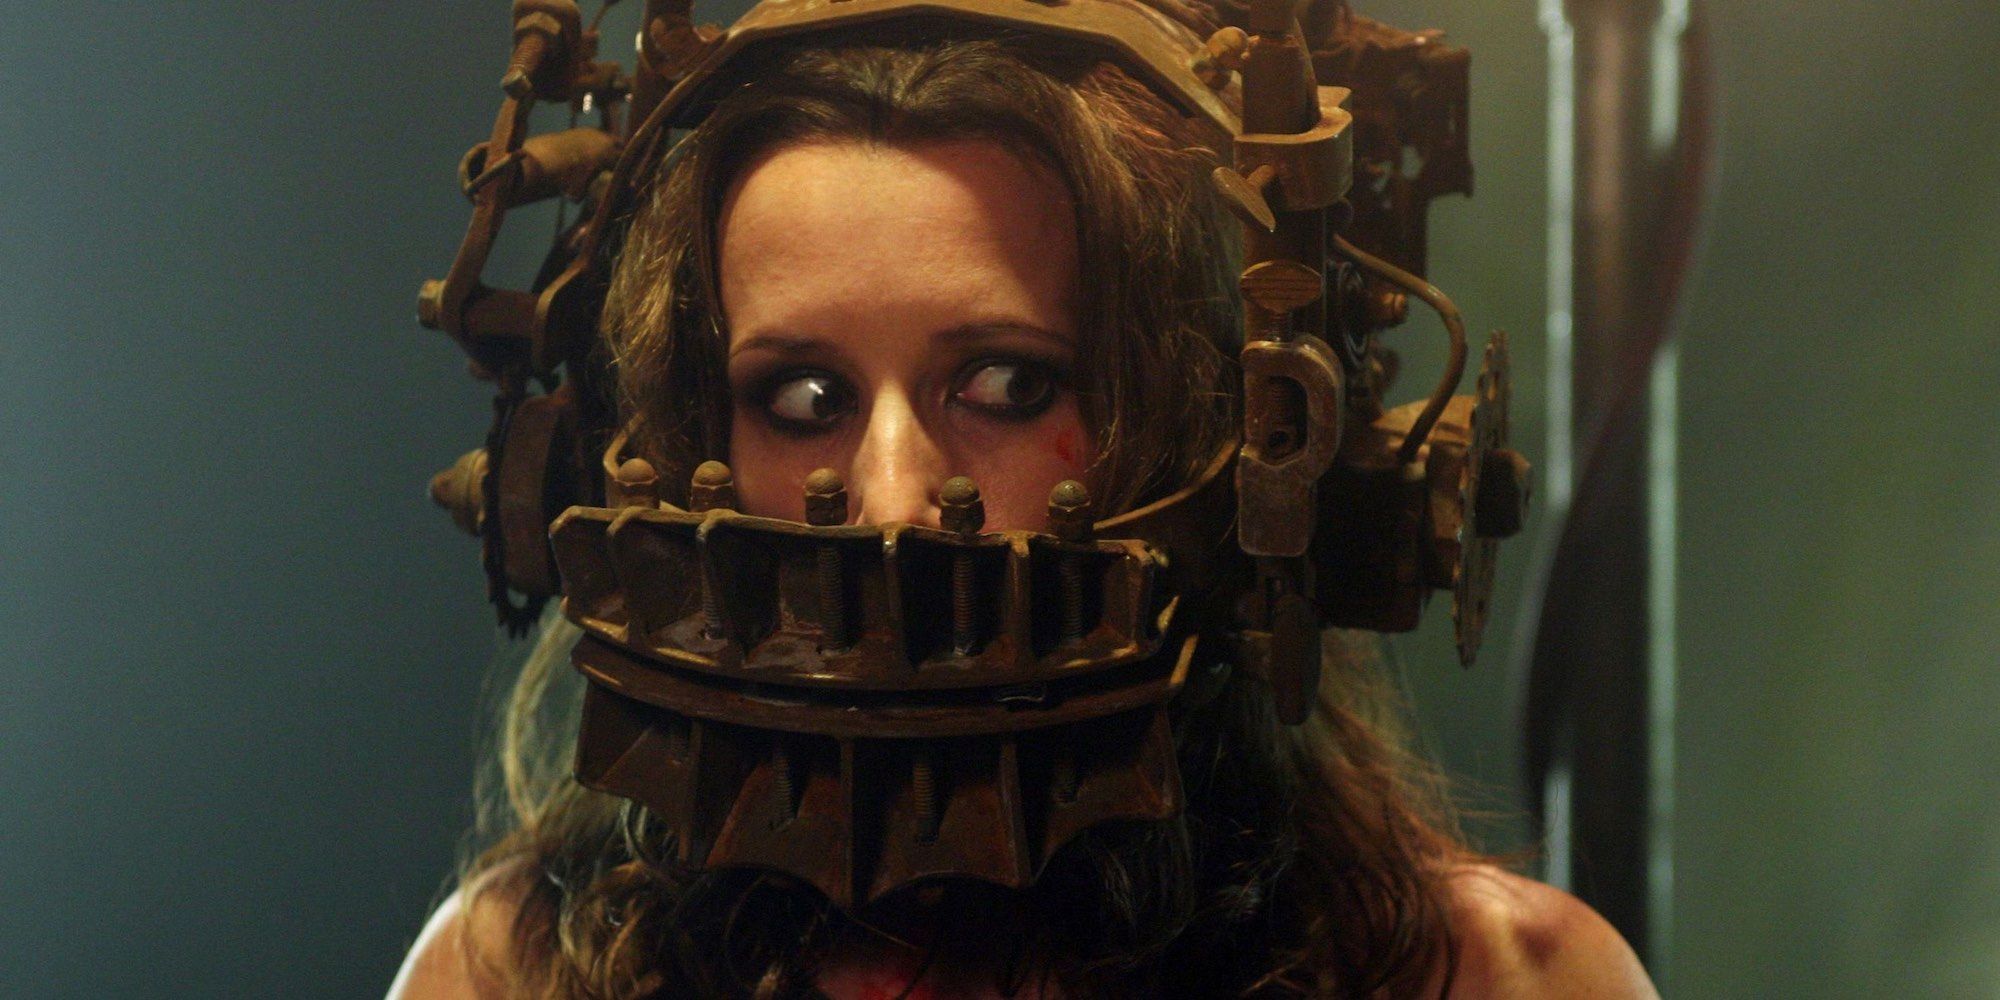 Character wearing a trap in the Saw movie